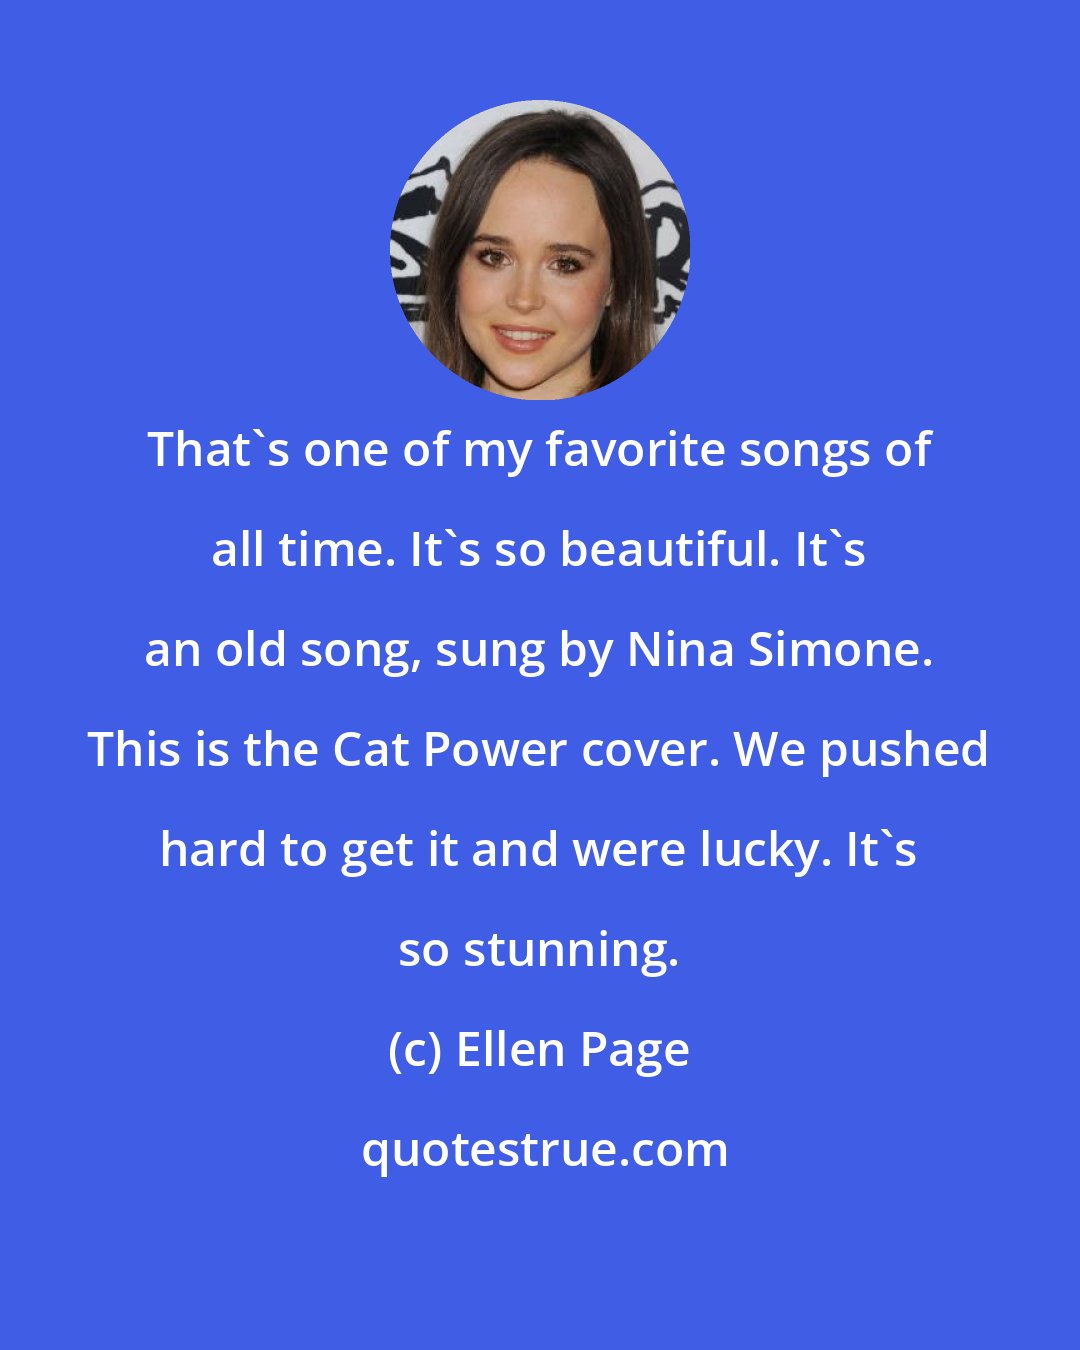 Ellen Page: That's one of my favorite songs of all time. It's so beautiful. It's an old song, sung by Nina Simone. This is the Cat Power cover. We pushed hard to get it and were lucky. It's so stunning.